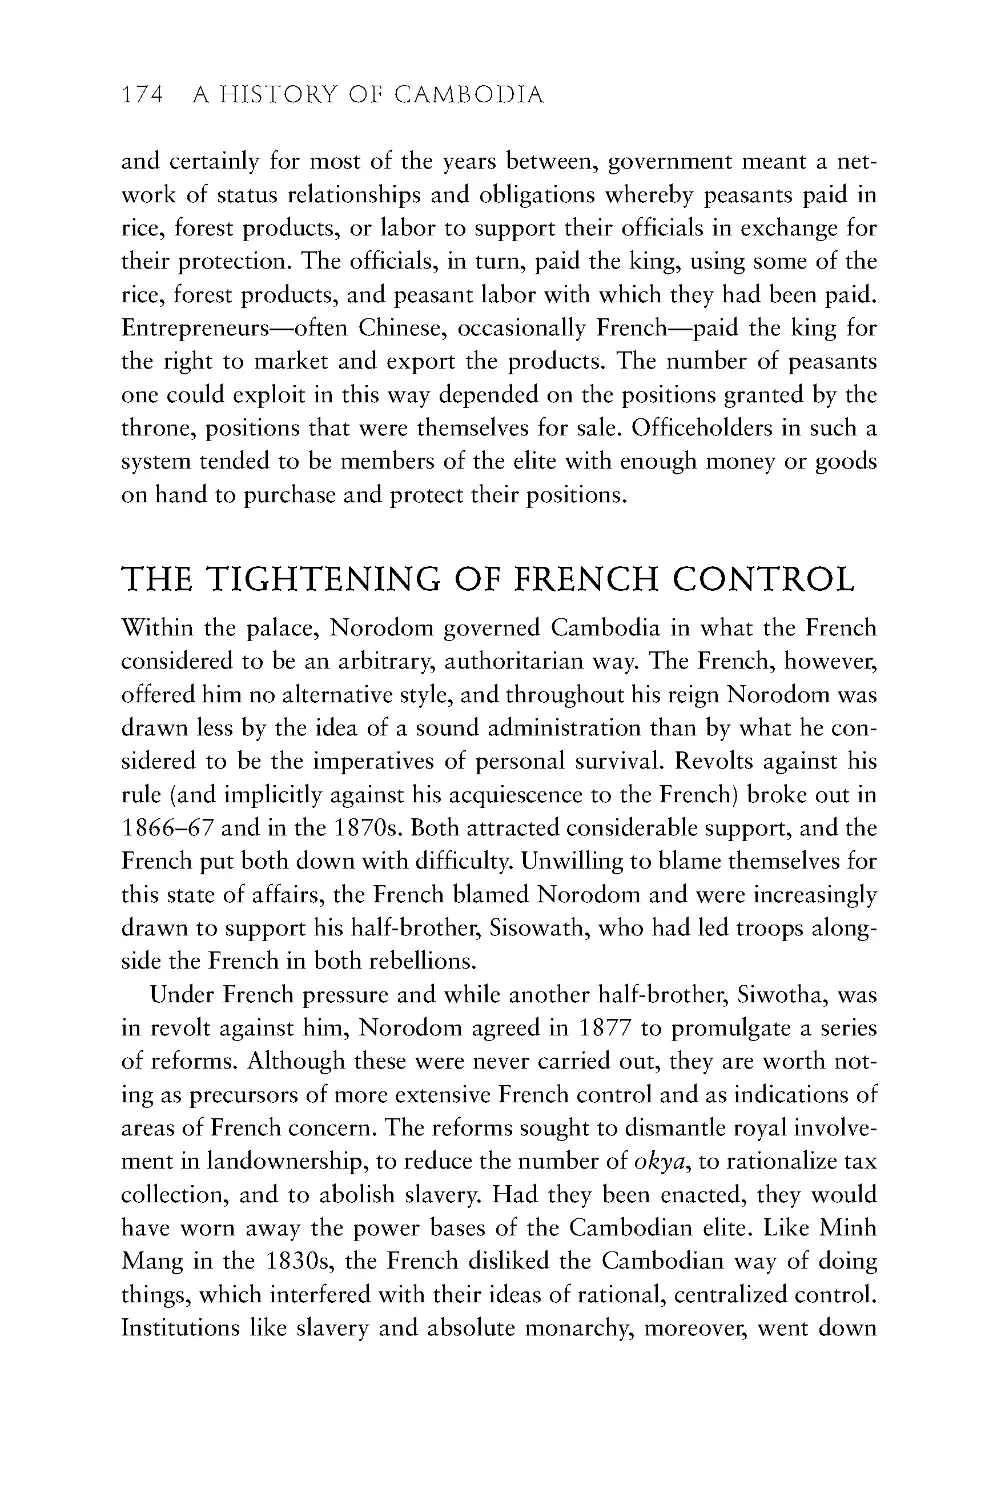 The Tightening of French Control